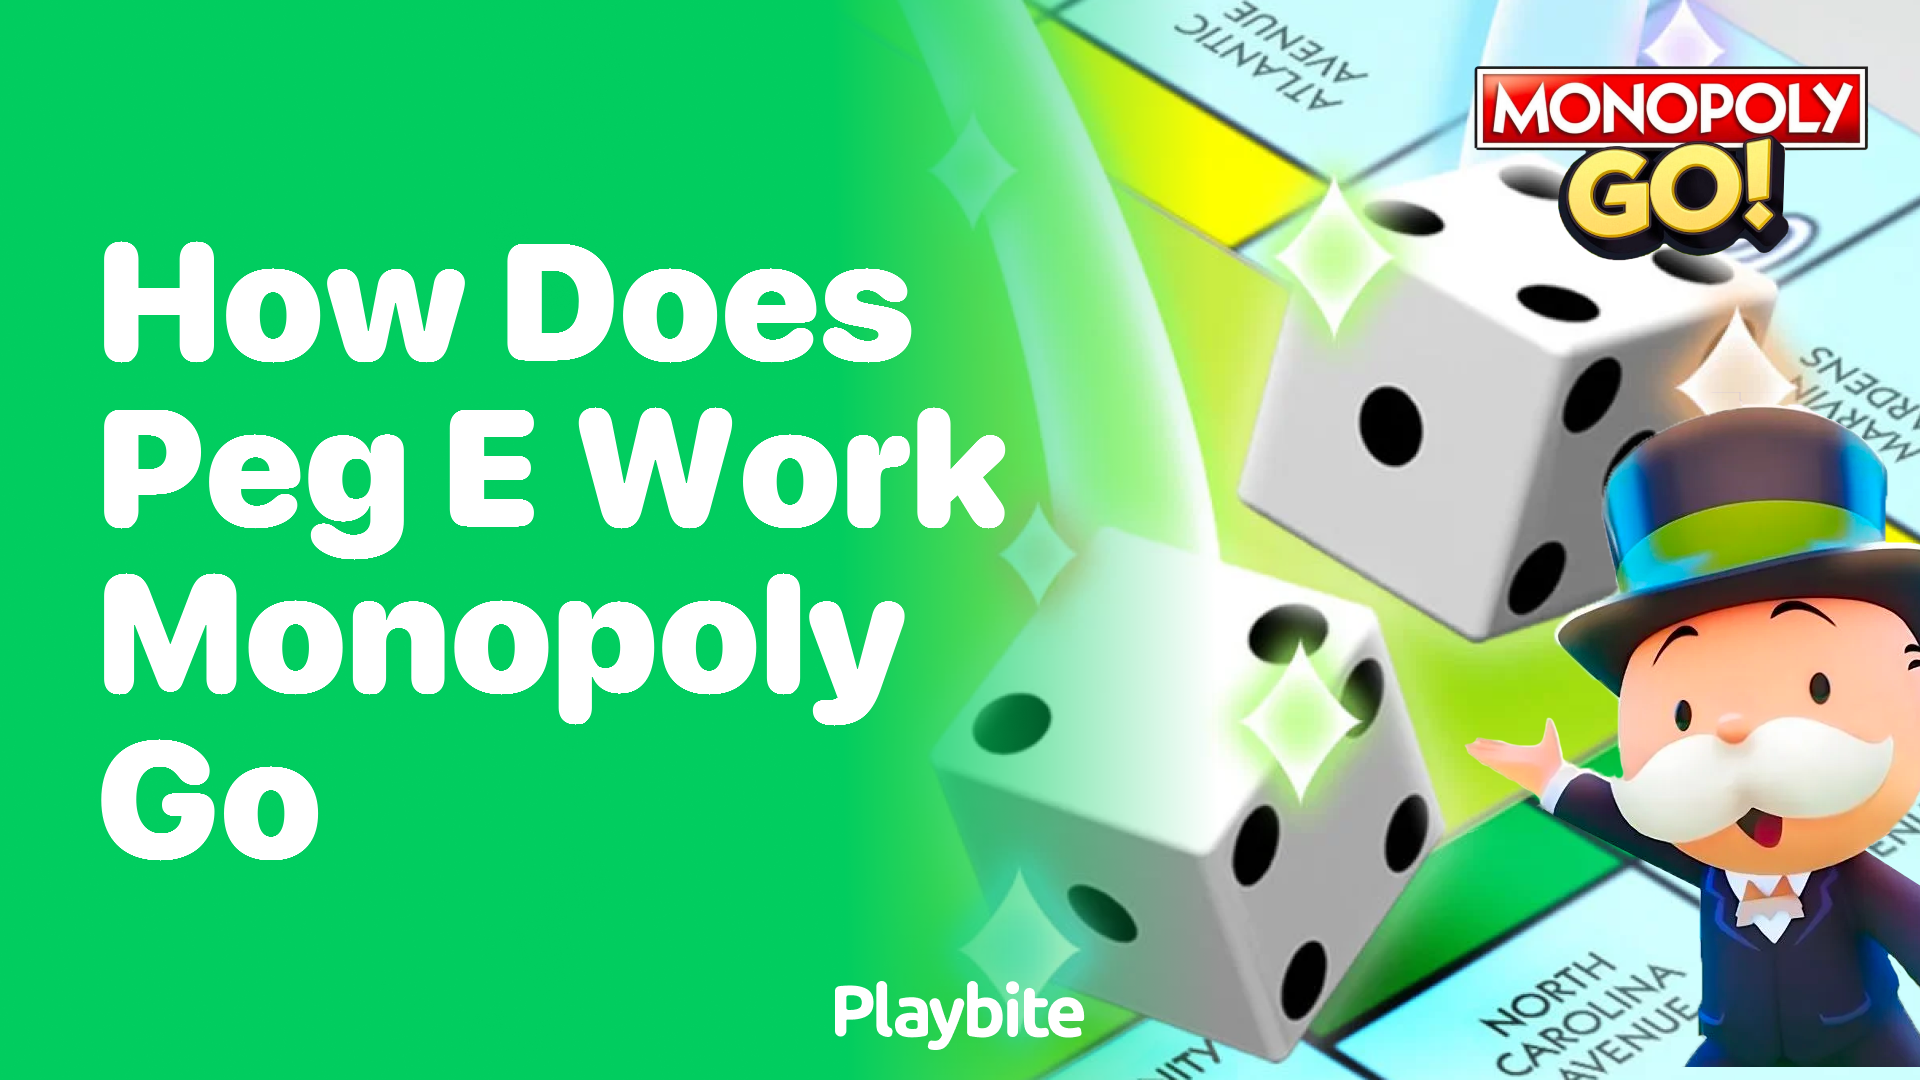 How Does Peg E Work in Monopoly Go?